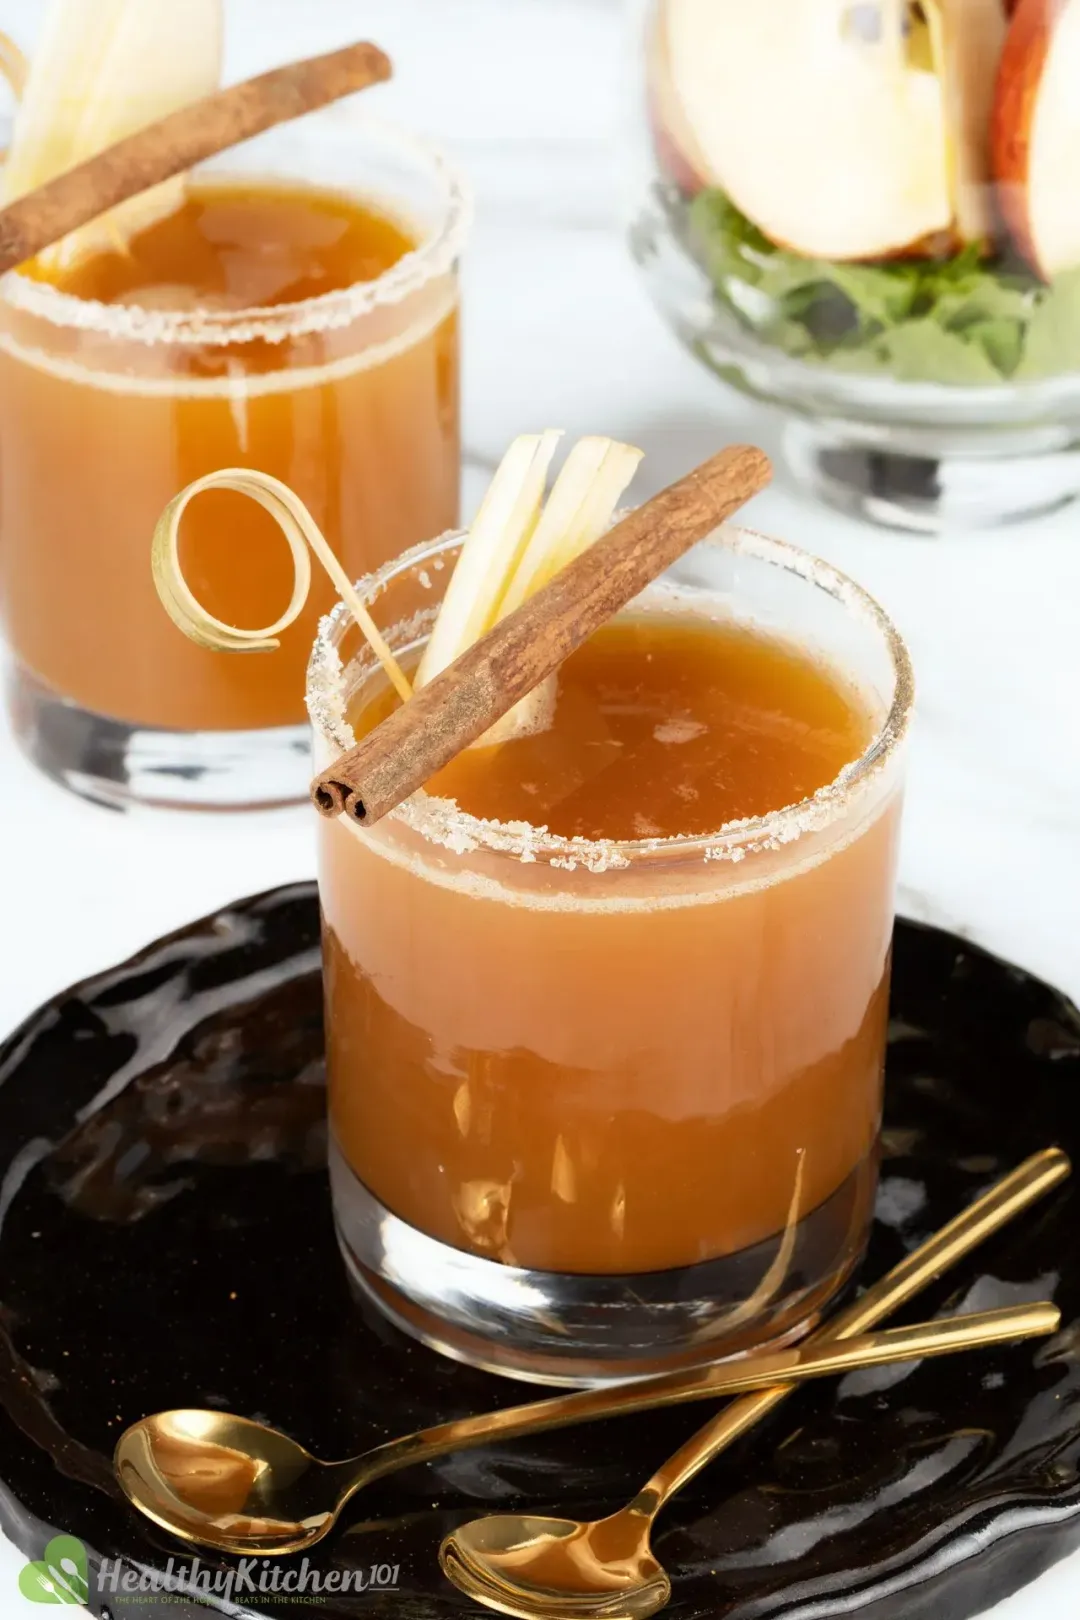 Two glasses of apple juice and vodka cocktail, garnished with cinnamon sticks and sliced apples, put on a black tray with gold spoons